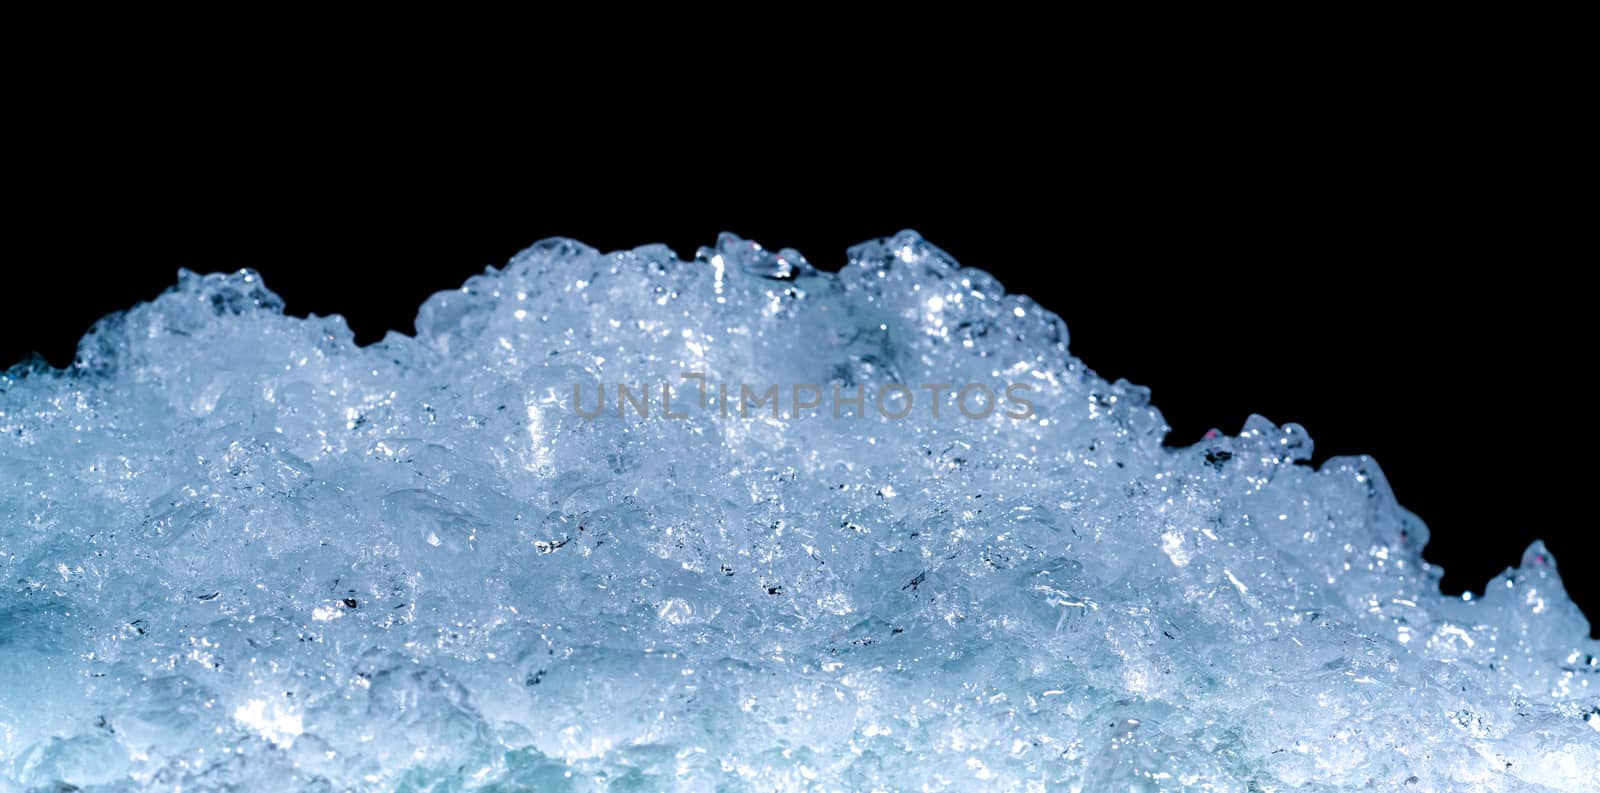 Pile of crushed ice cubes on dark background with copy space. Crushed ice cubes foreground for beverages. by Fahroni